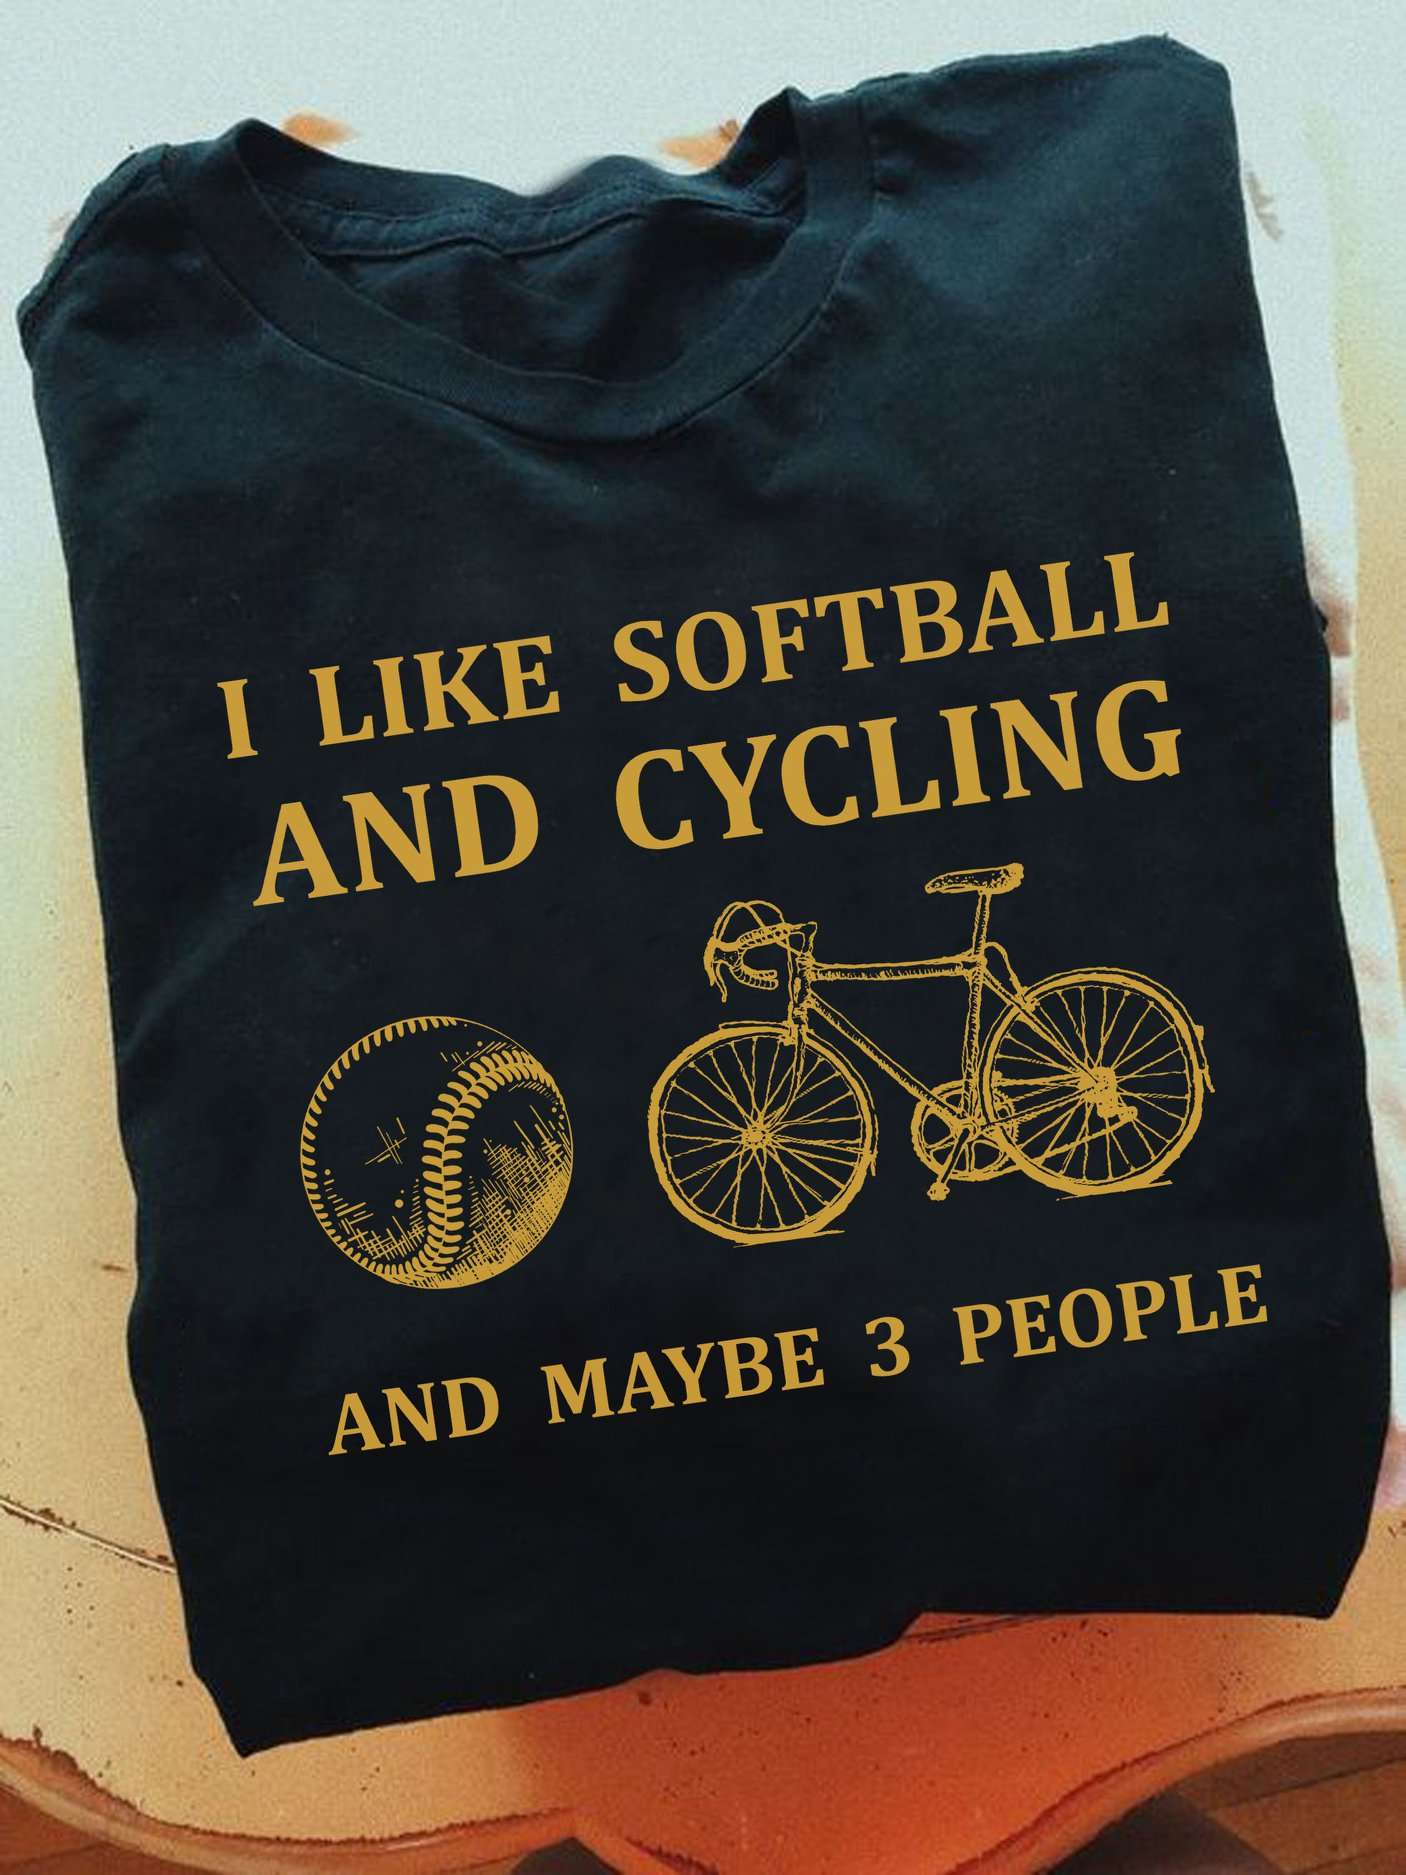 I like softball and cycling and maybe 3 people - Life behind bar, softball the sport